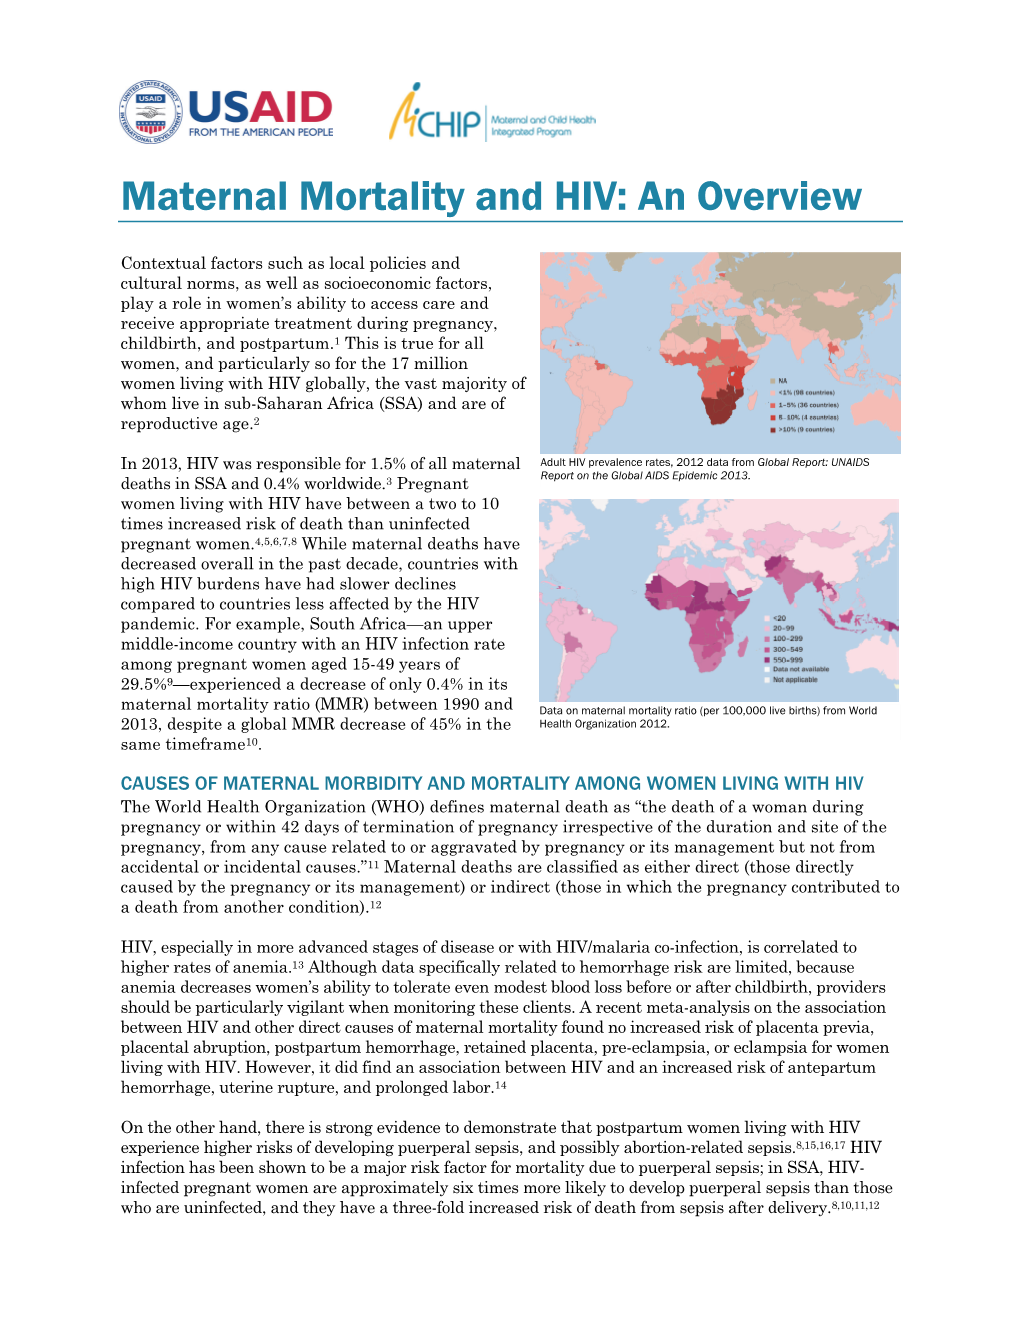 Maternal Mortality and HIV: an Overview